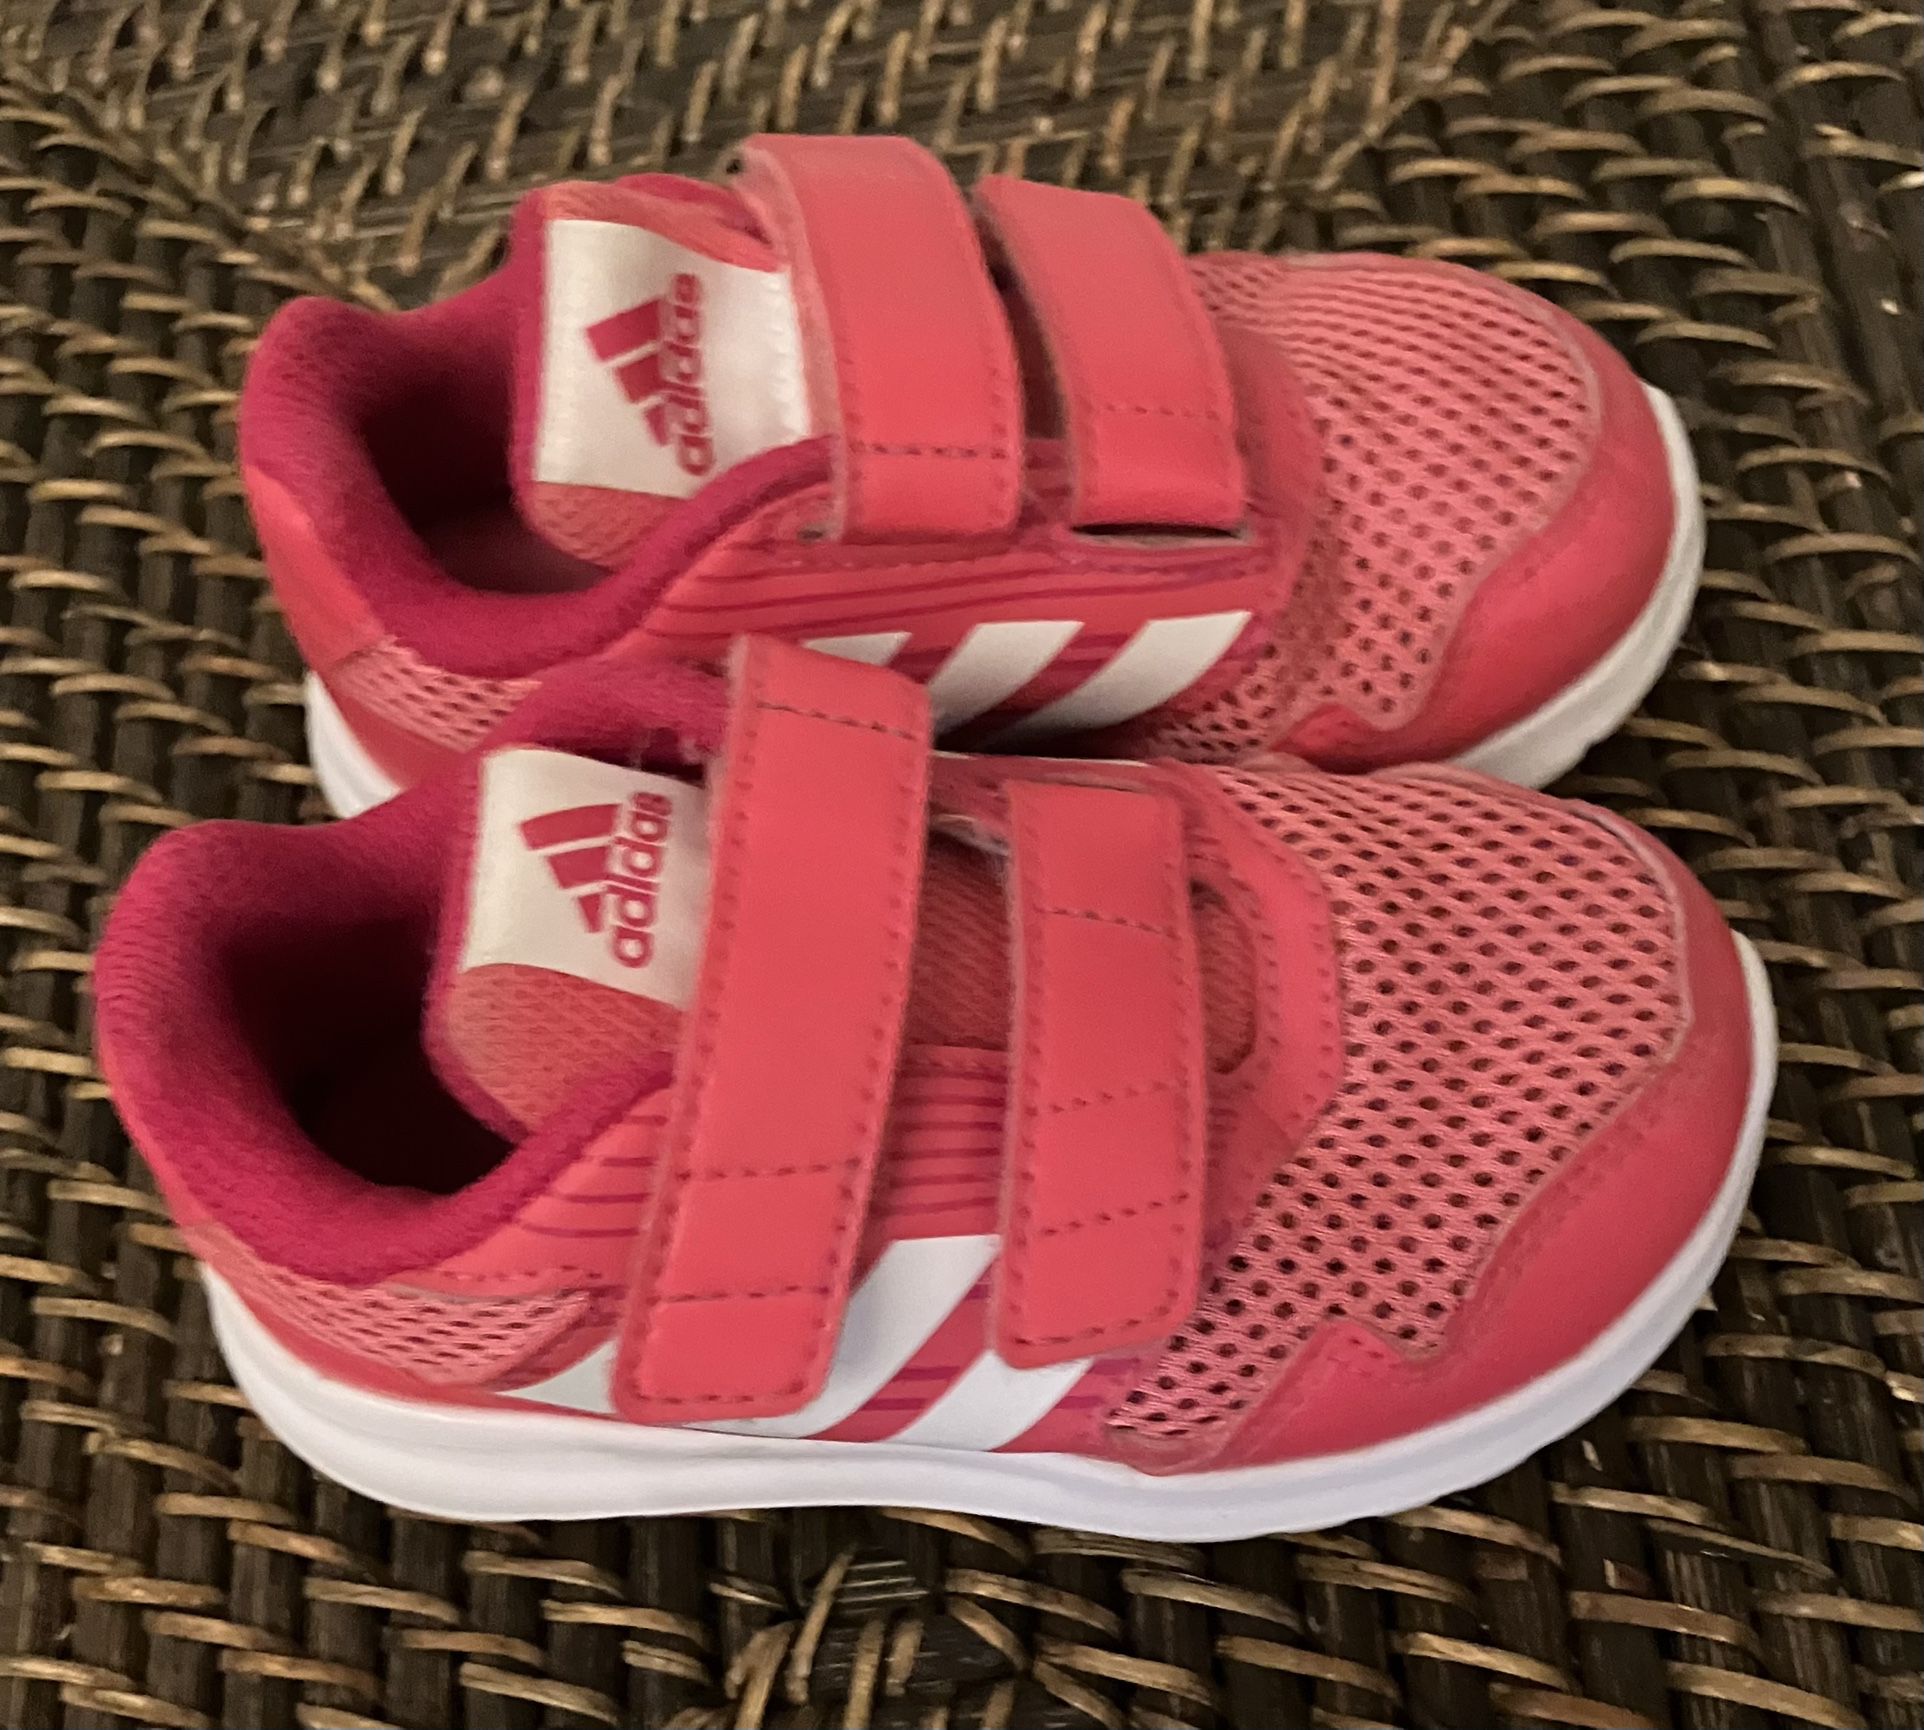 Little Girl’s Adidas Trainers, Hook & Loop Velcro, Like New, Size: 7